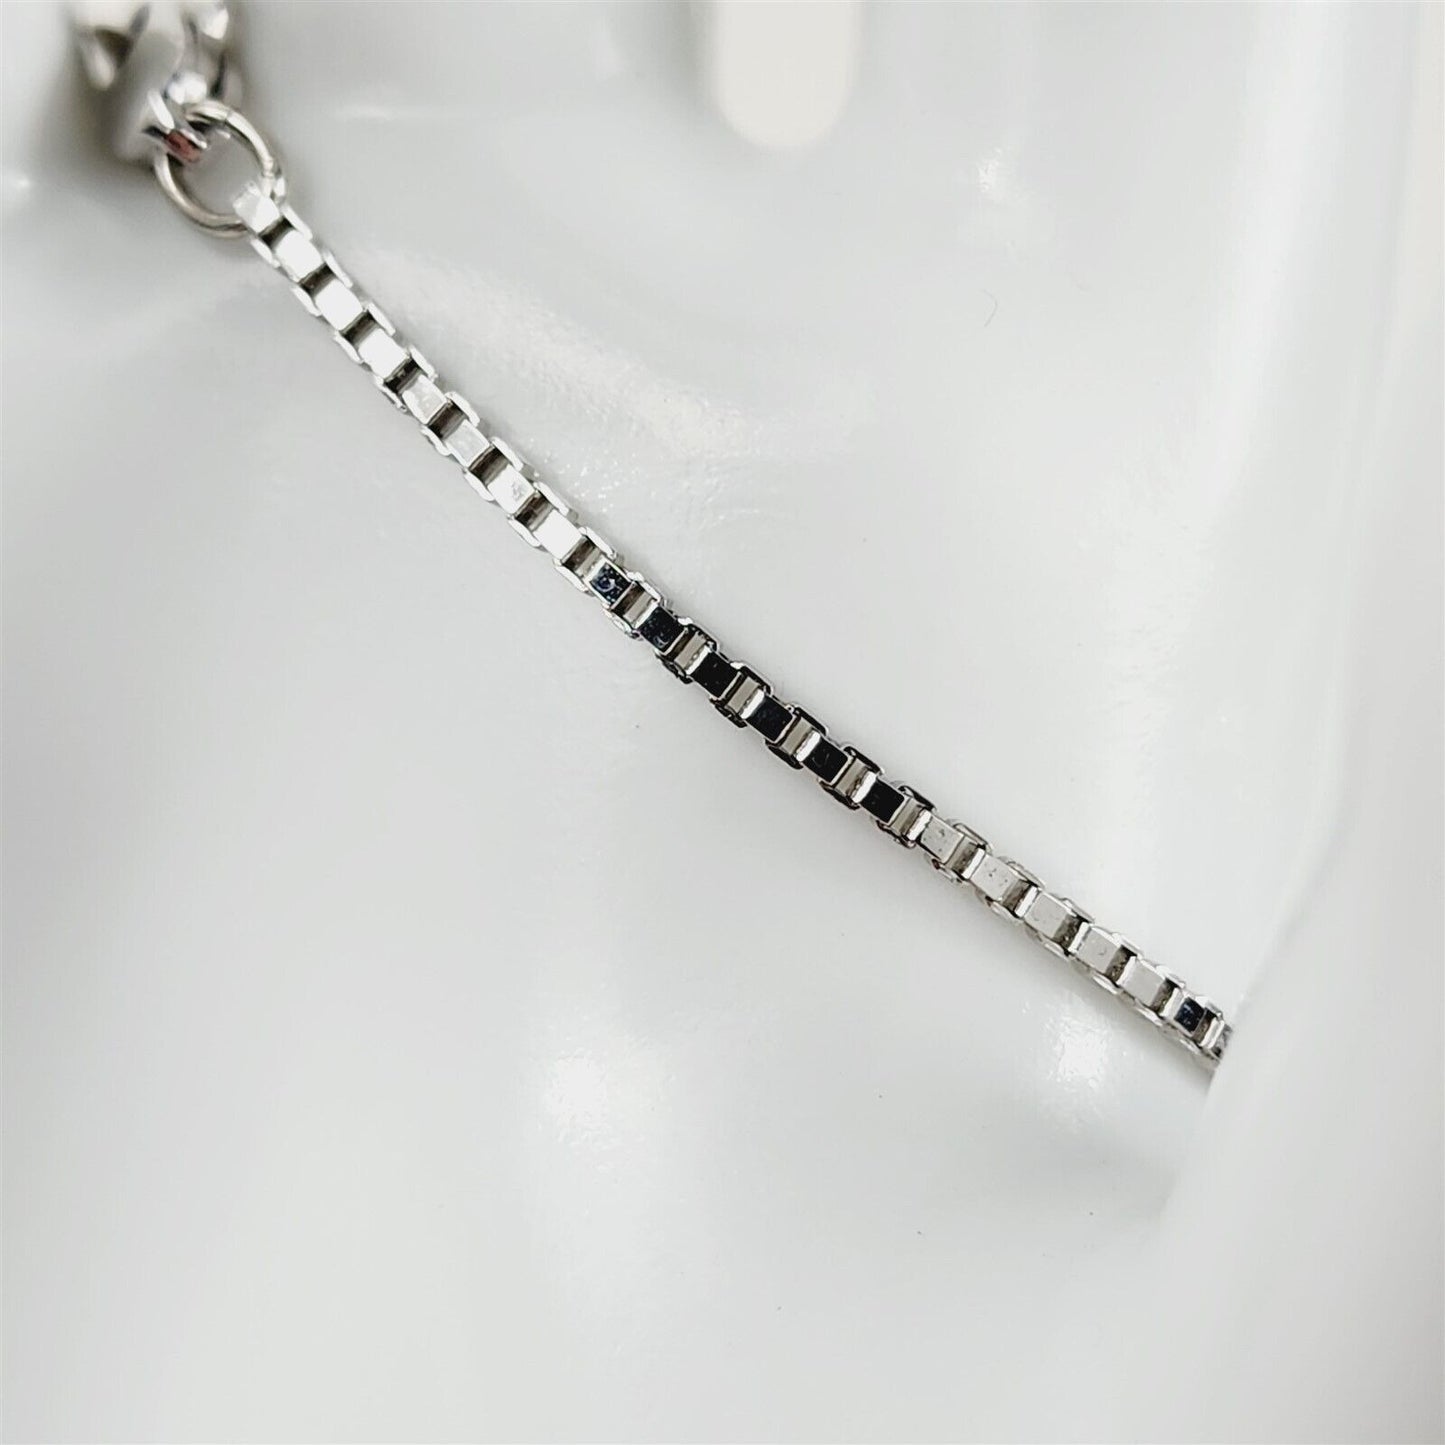 Rhodium Plated Anklet Ankle Bracelet Cable Link 1.25mm Chain - 10"